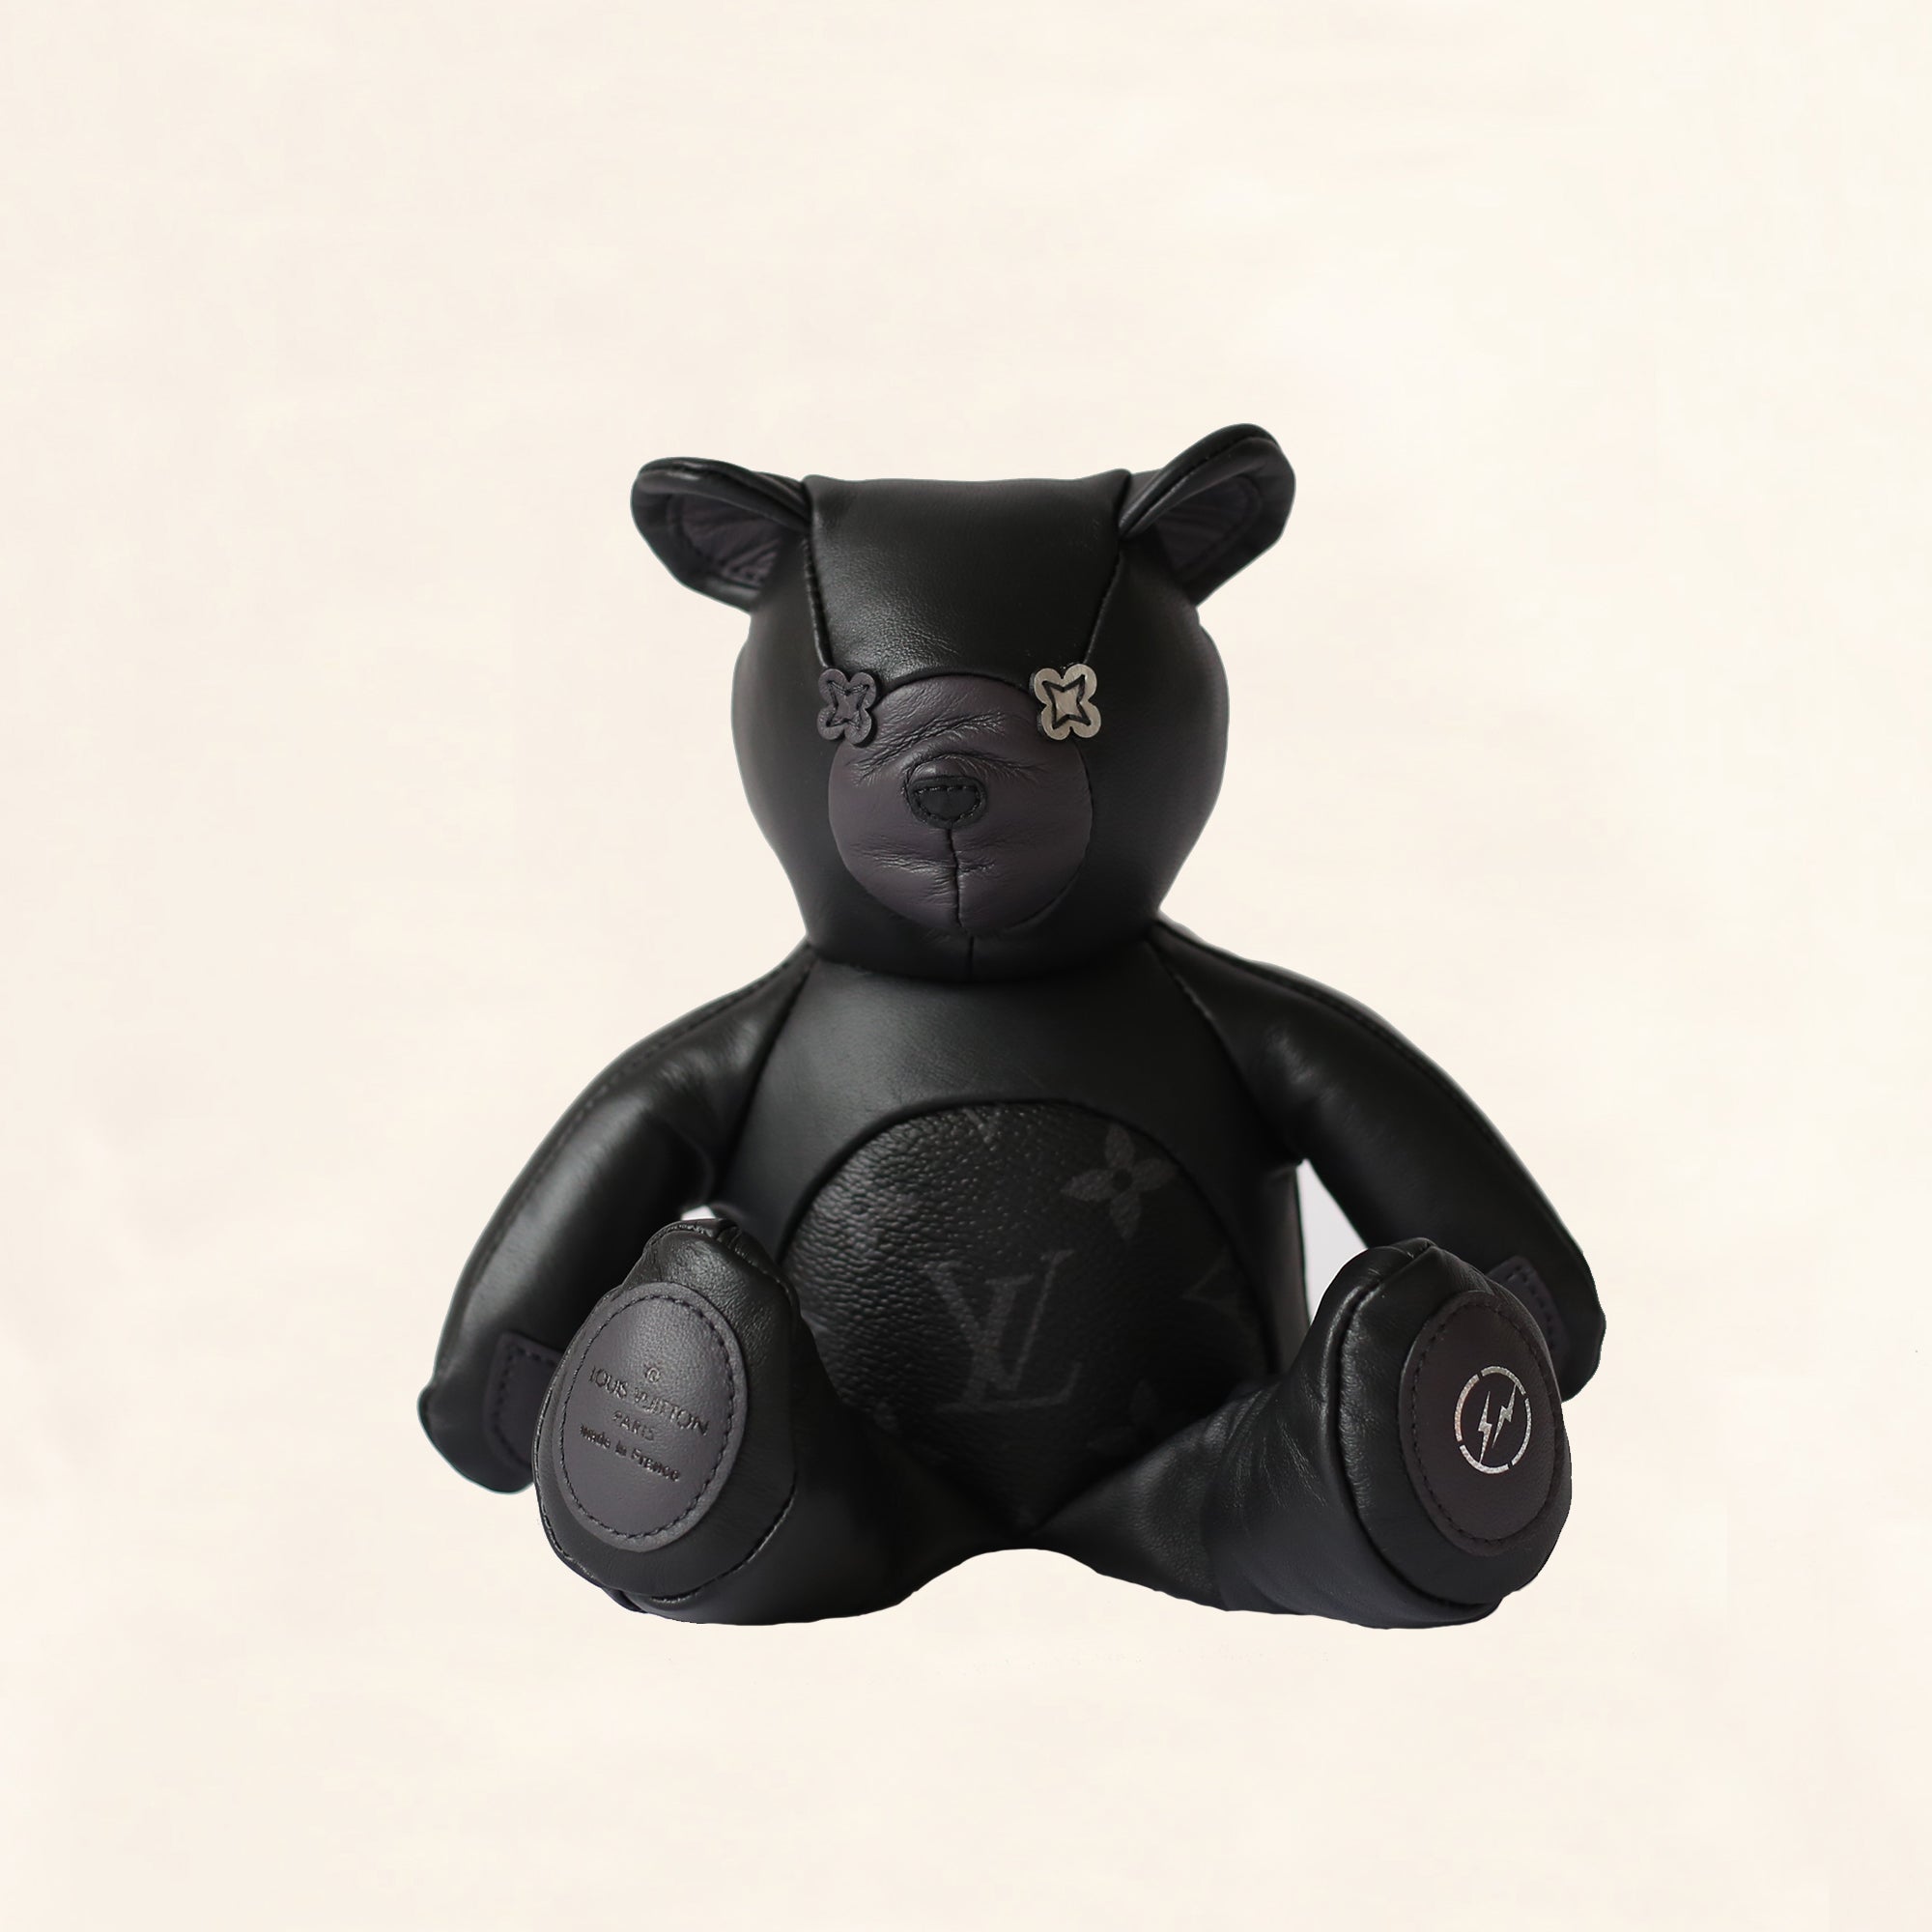 A $9,000 Monogrammed Louis Vuitton Teddy Bear Exists – StyleCaster